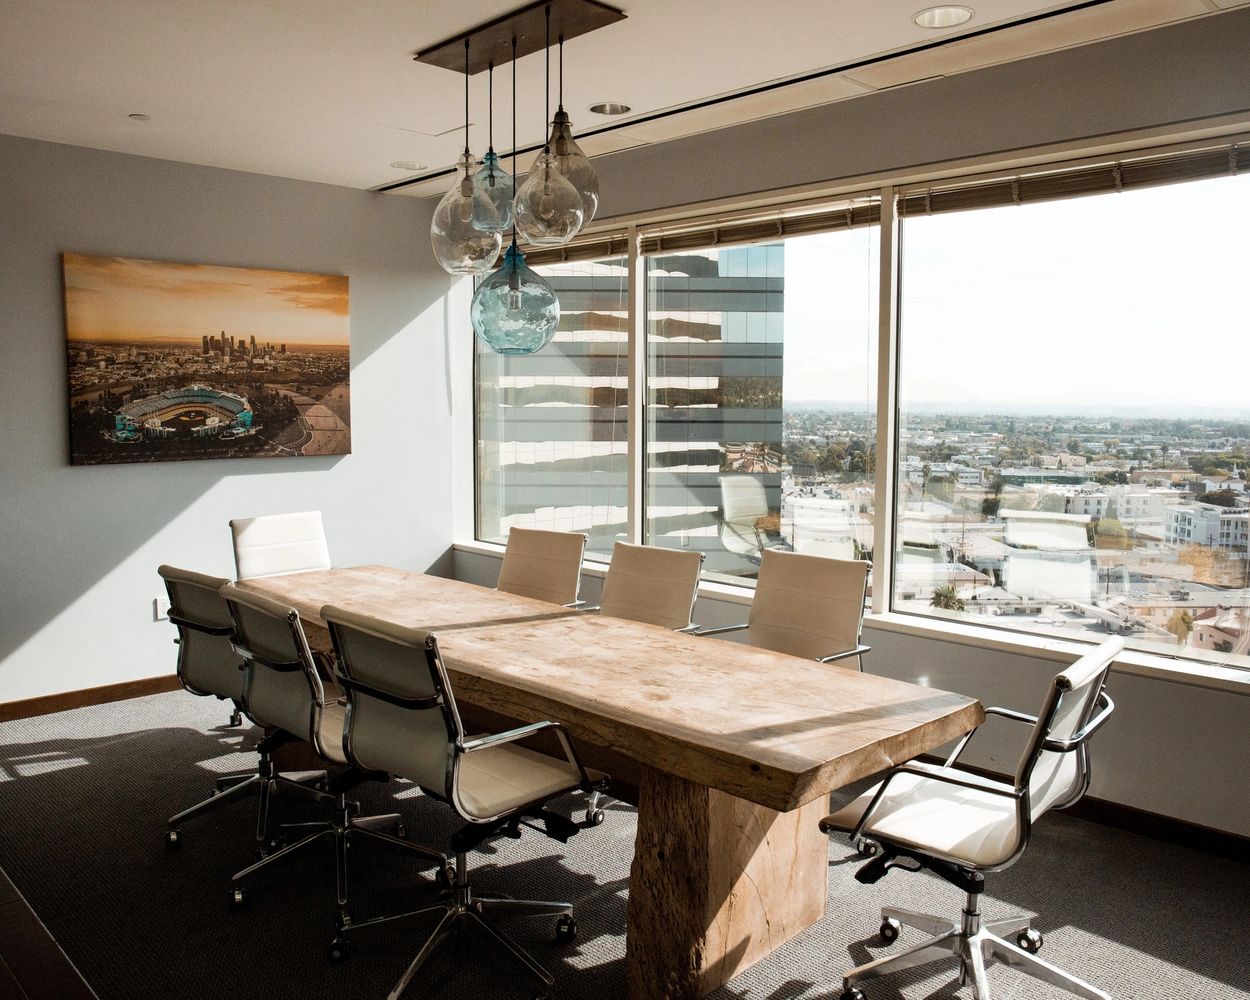 Office space overlooking city.